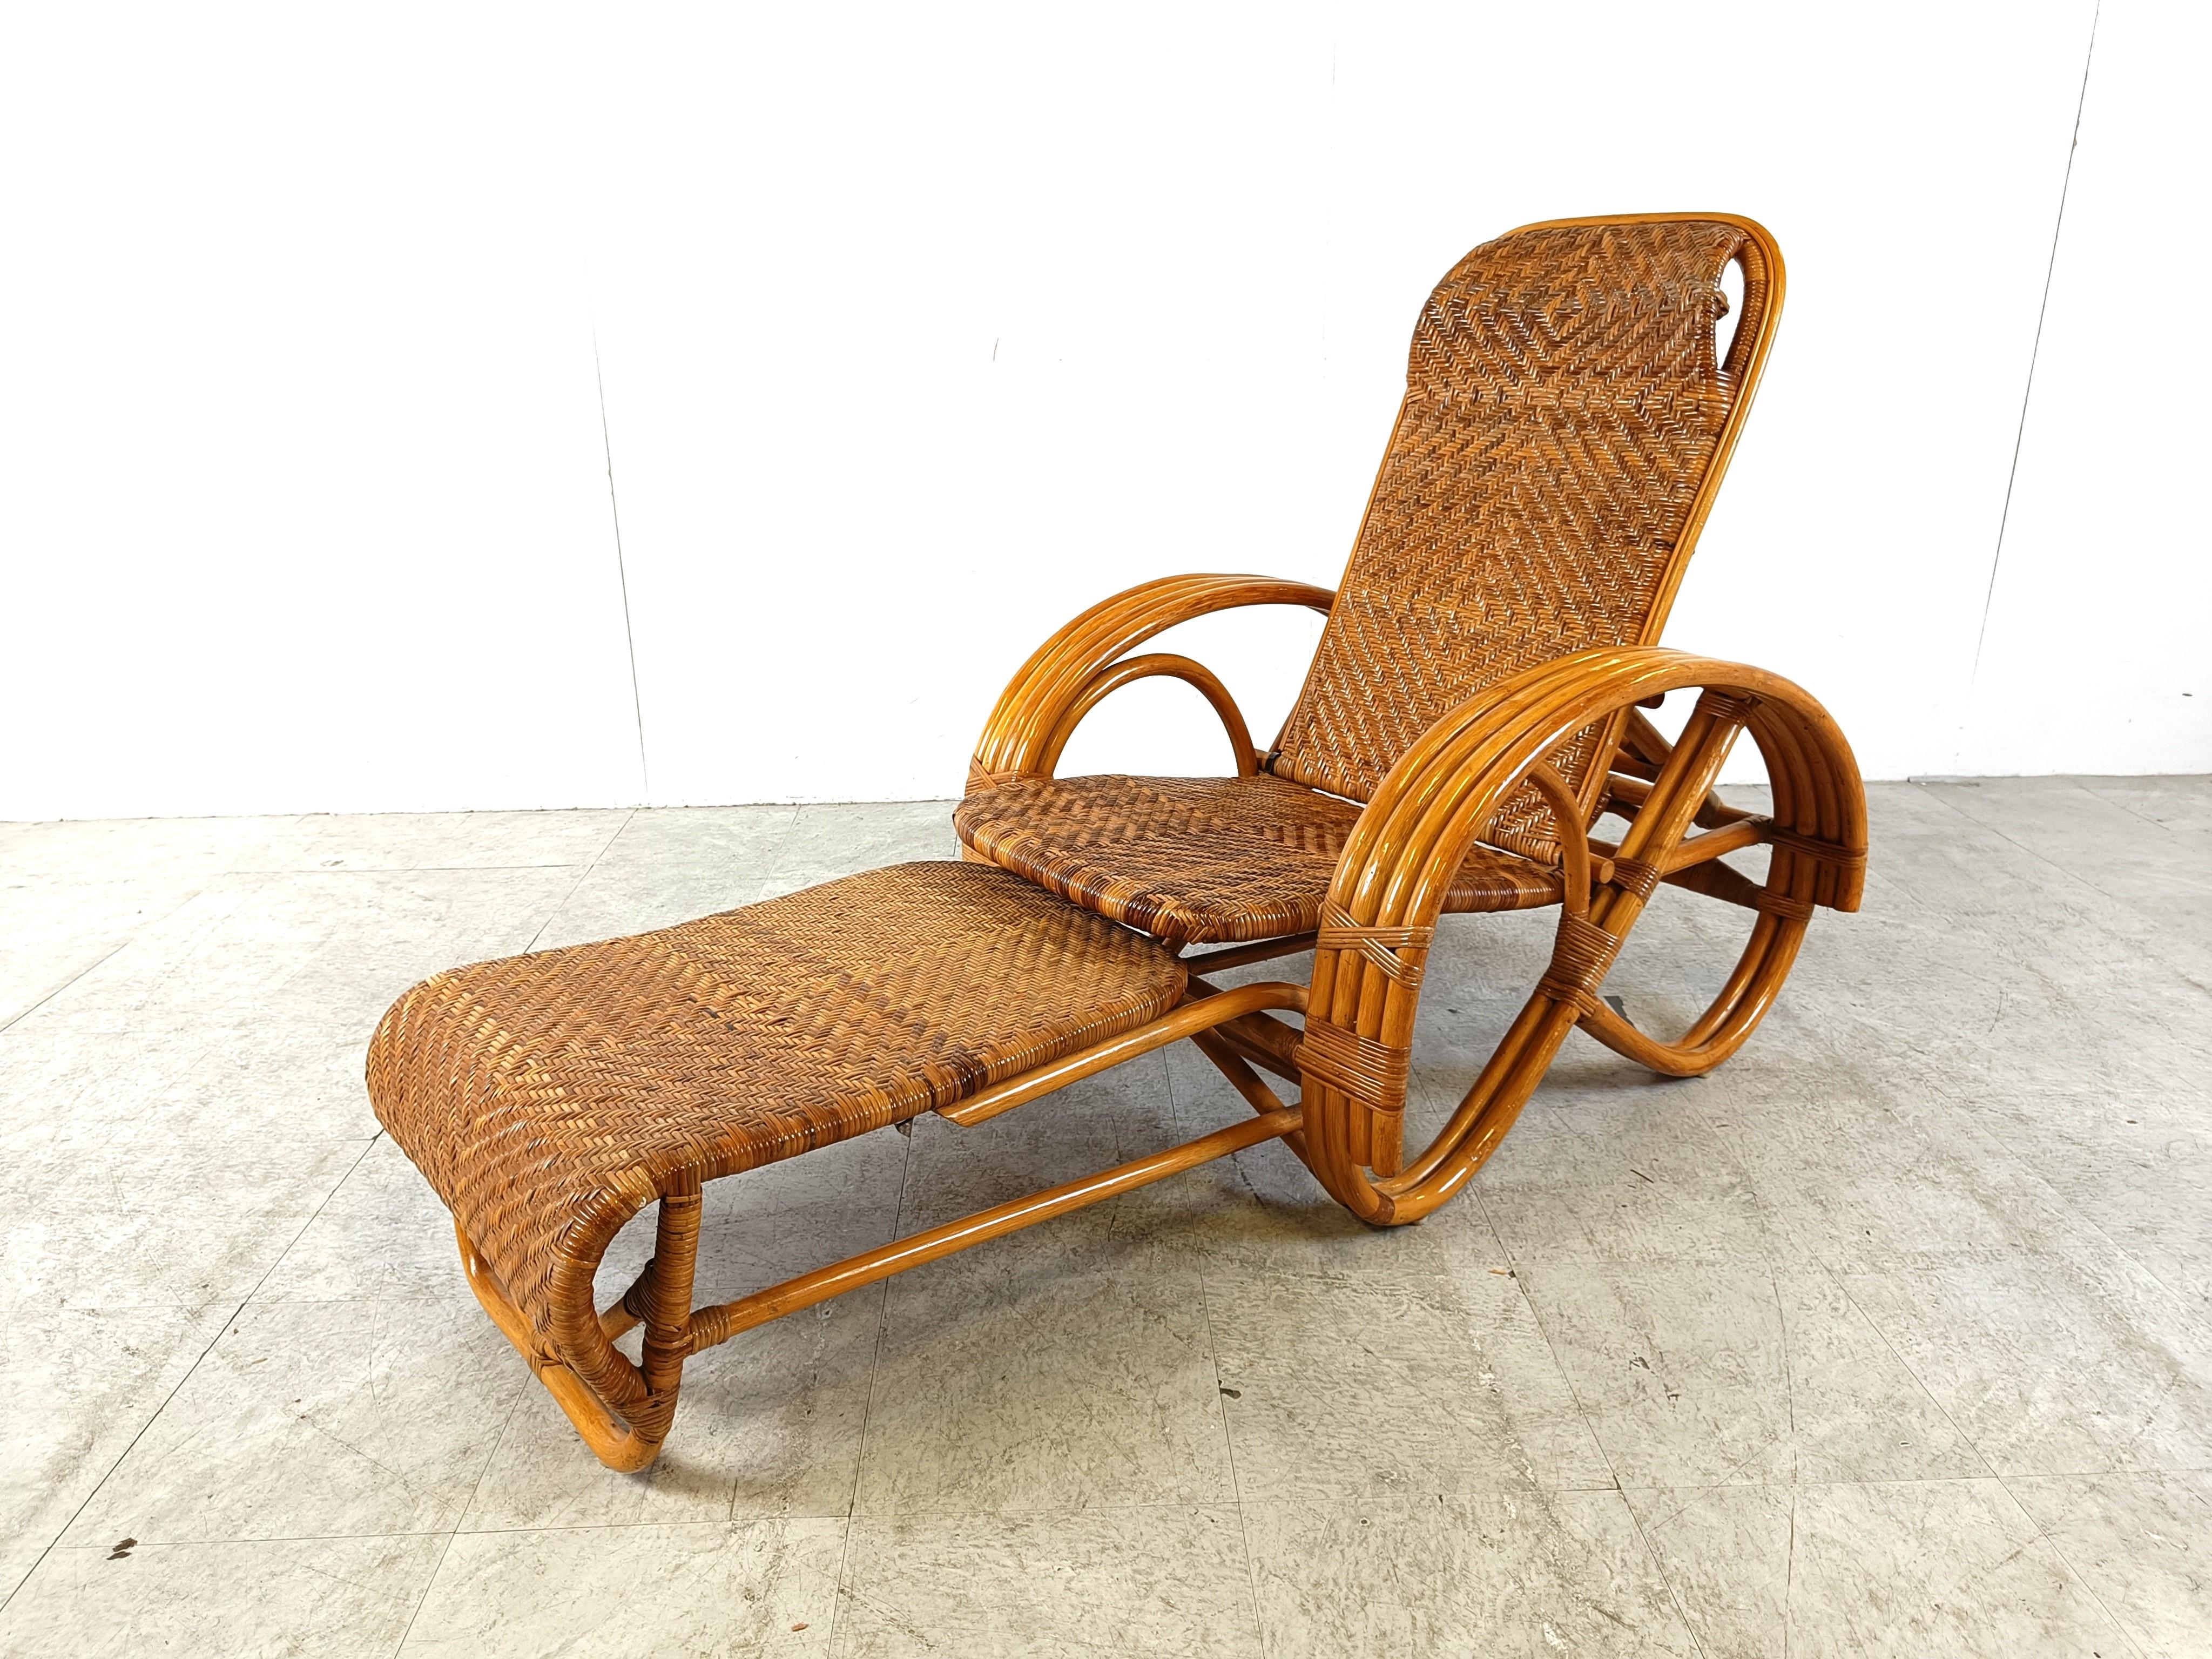 Mid century Paul Frankl style lounge chair/chaise longue

Beautifully shaped bamboo frame with wicker seat and backrests.

The backrests is adjustable in multiple position and can be flattened. The footrest can also be extended or stored away under